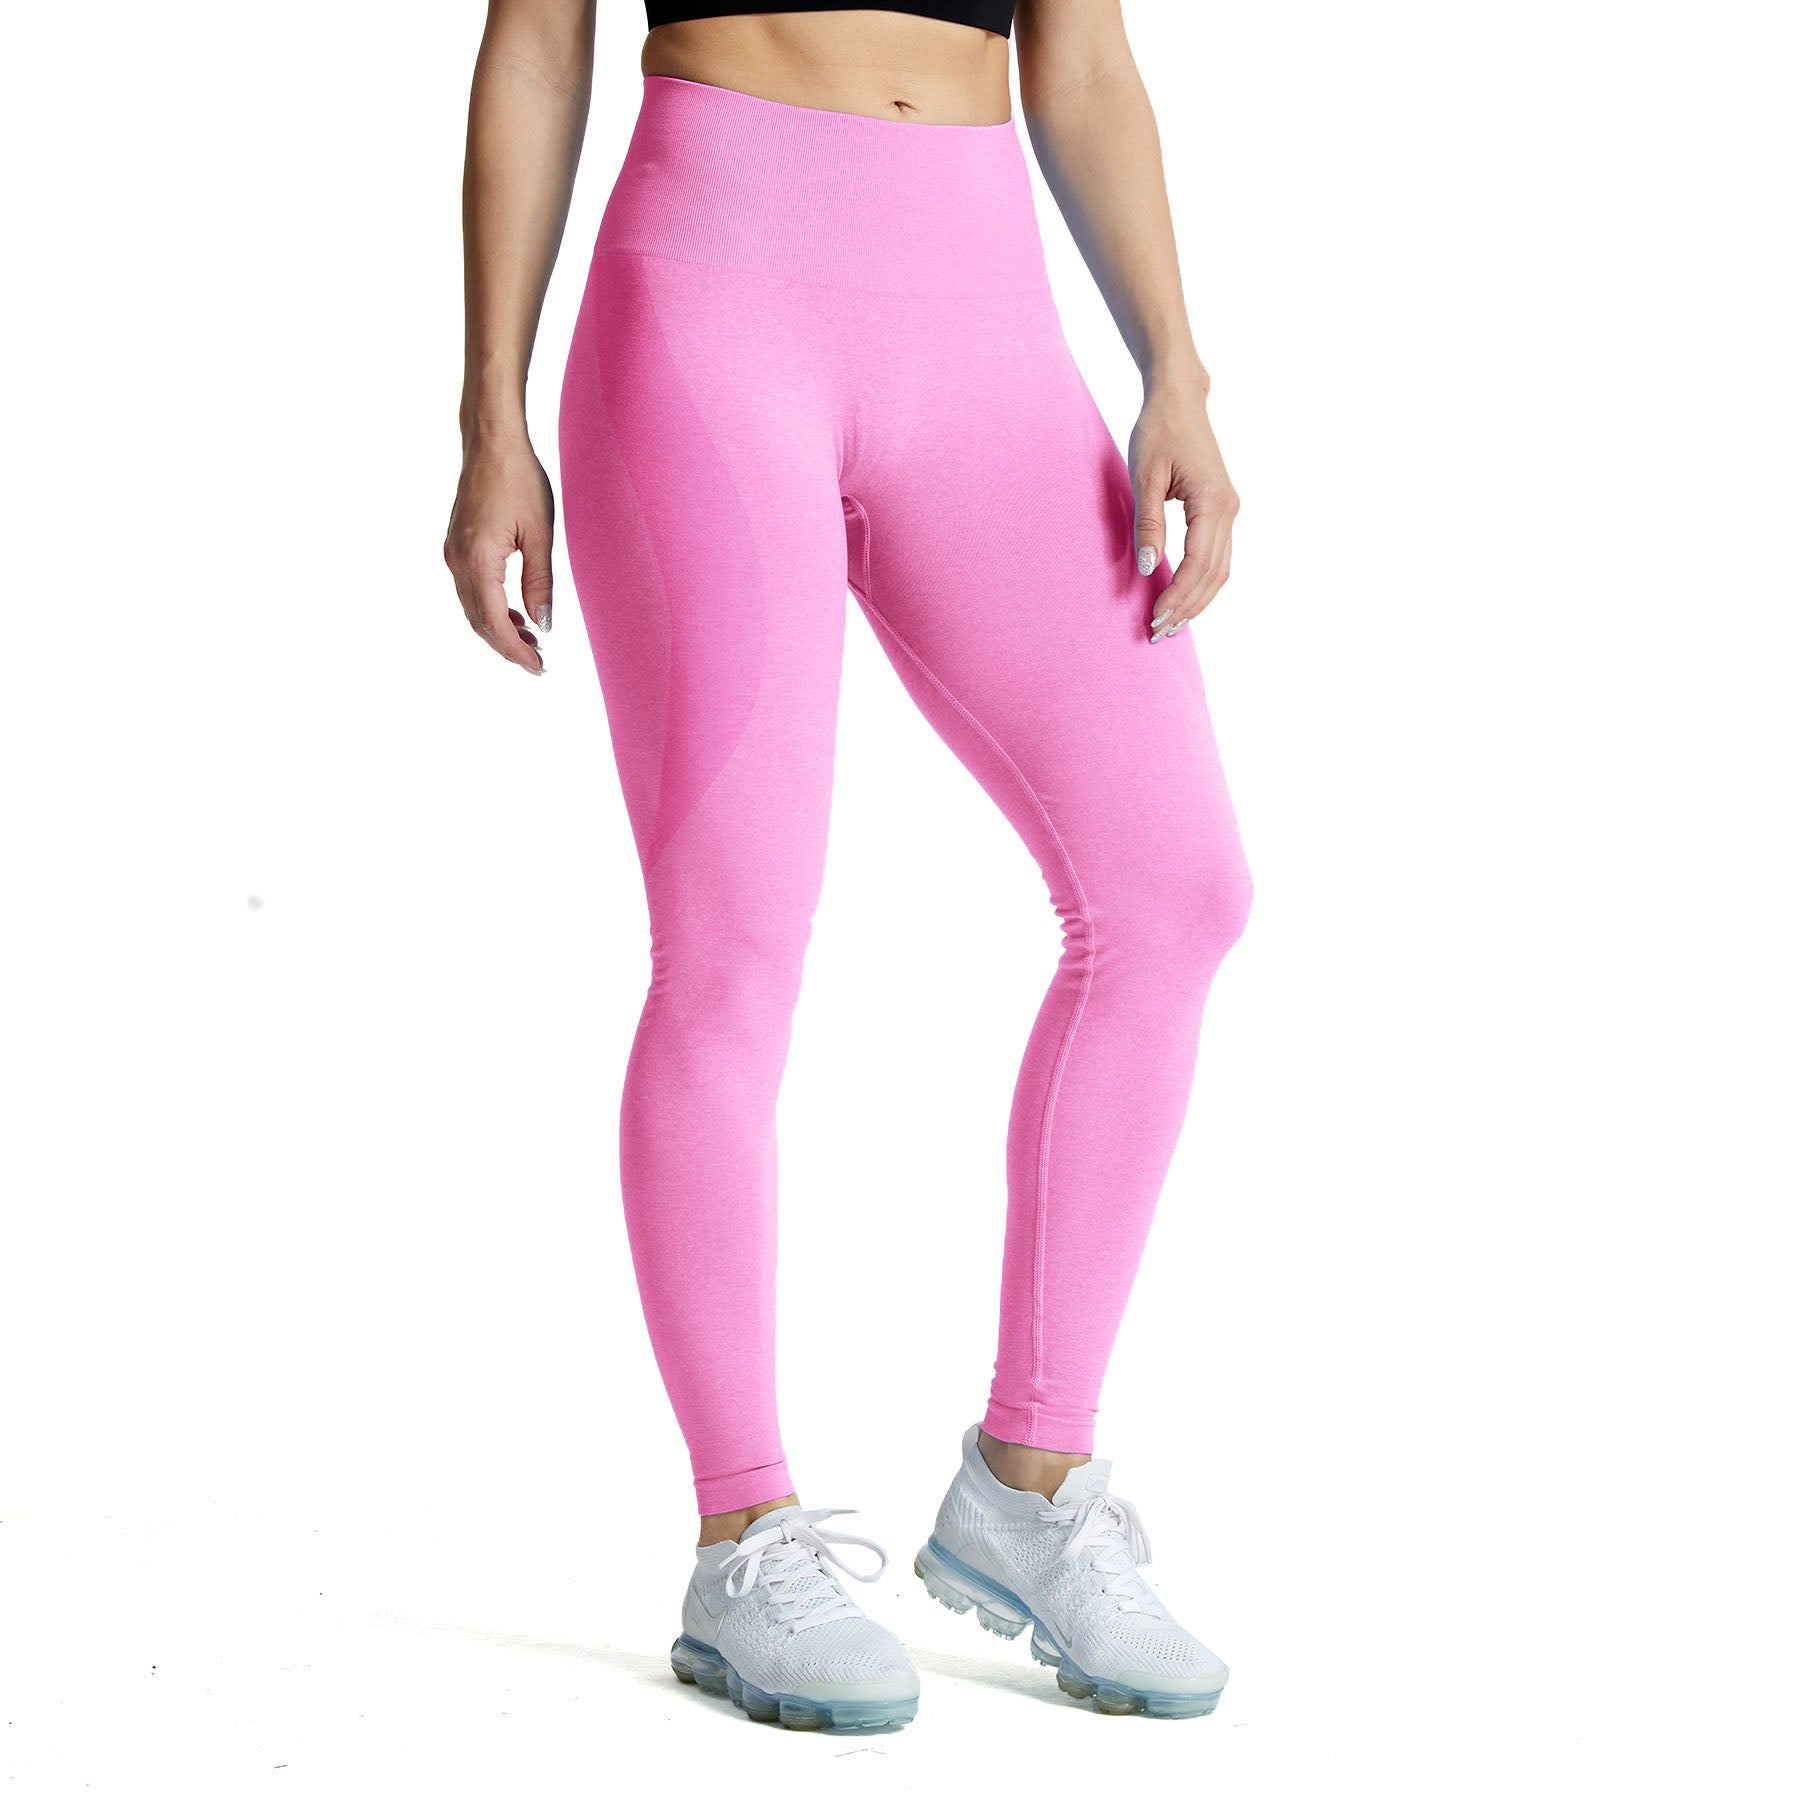 Asos Soft Touch Leggings With Fold Over Waistband Pink, $28